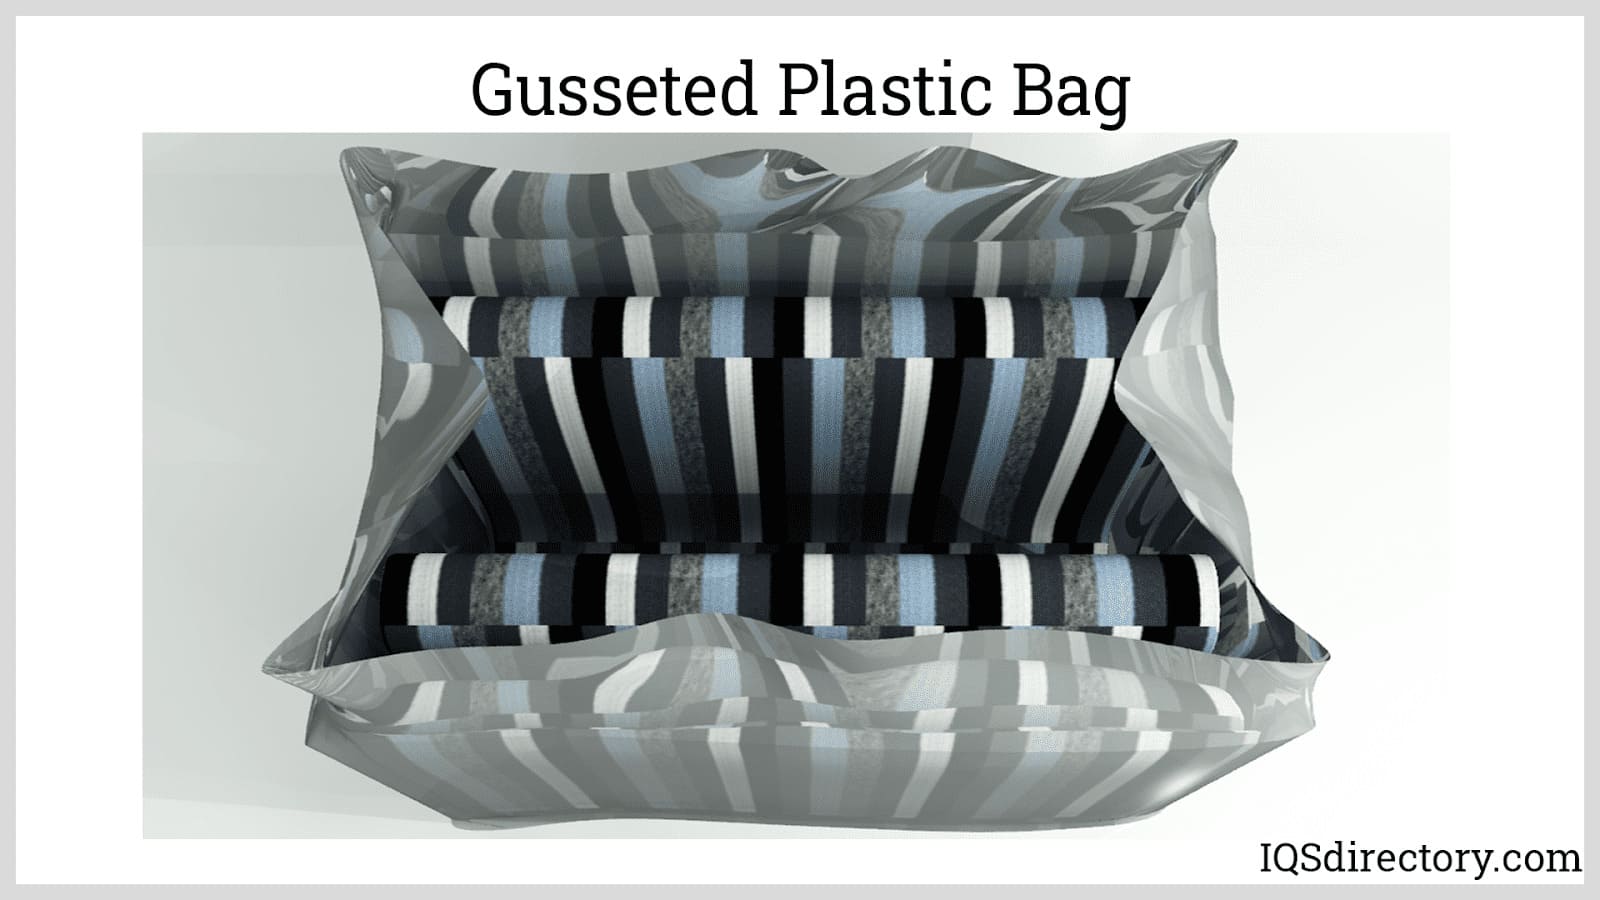 Gusseted Plastic Bag